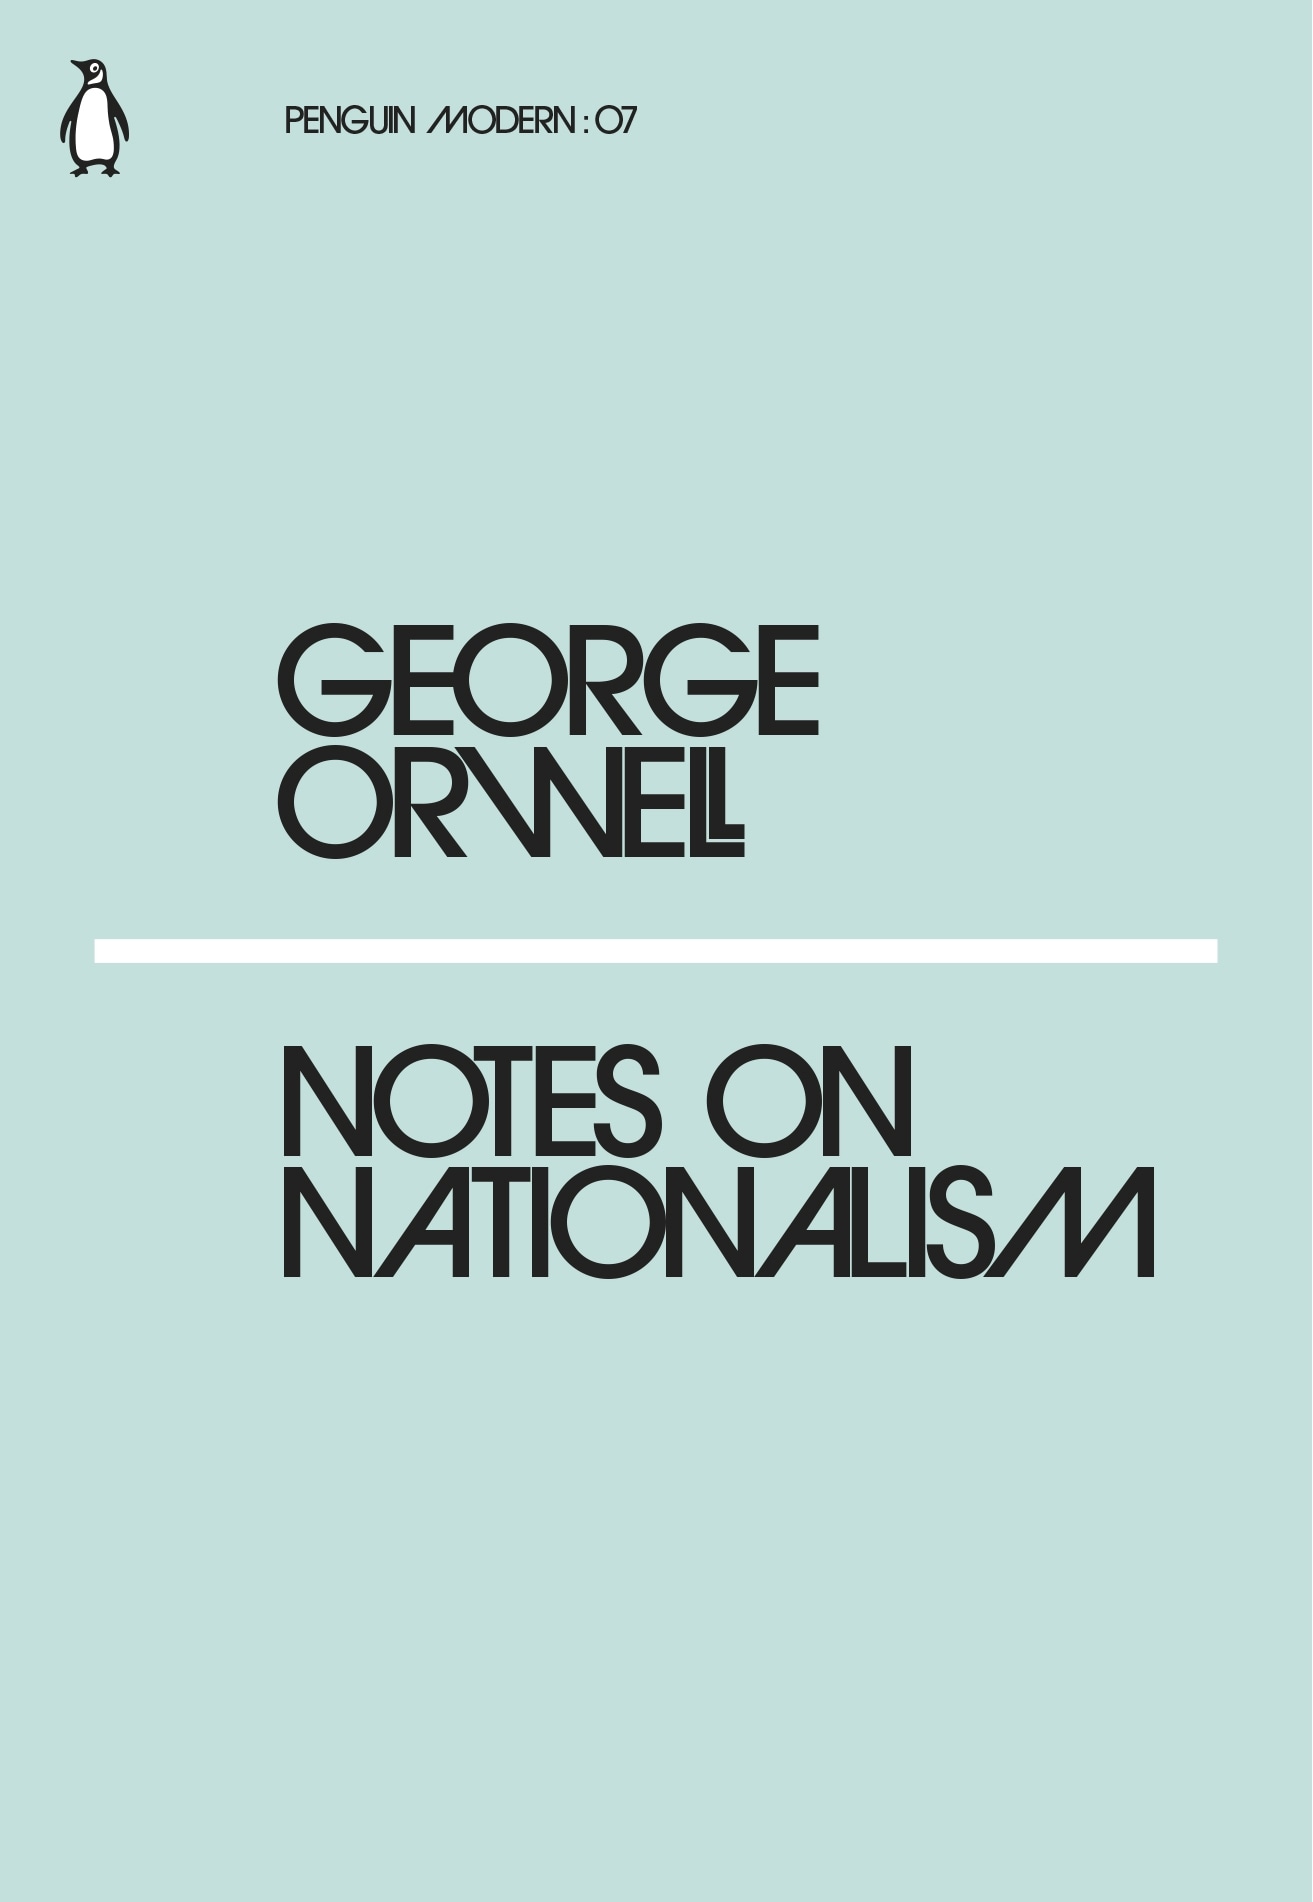 Book “Notes on Nationalism” by George Orwell — February 22, 2018